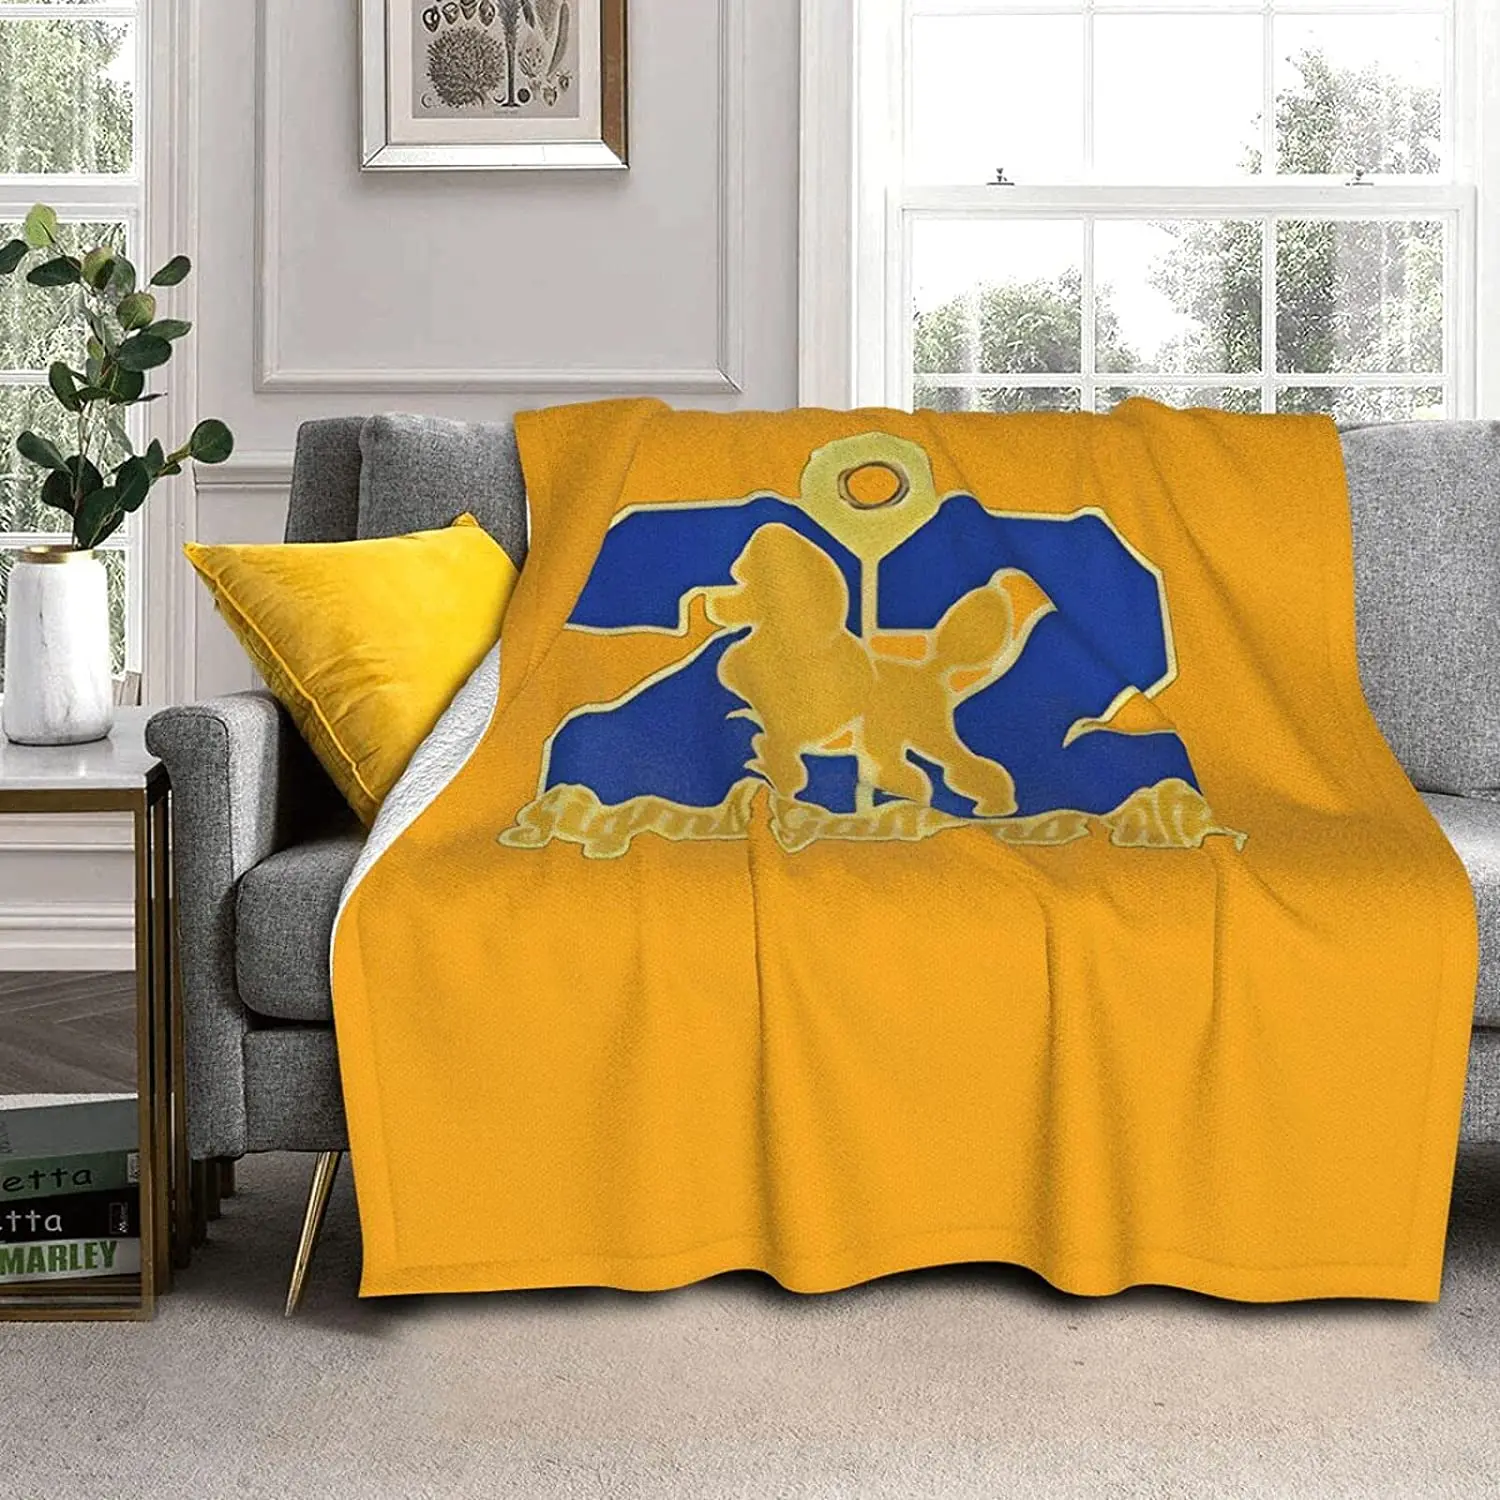 

Sigma Gamma Rho Wool Lamb Blanket, Double Blanket, Air Conditioning Blanket, Flannel Printing Design, Suitable for Sofa Bed and